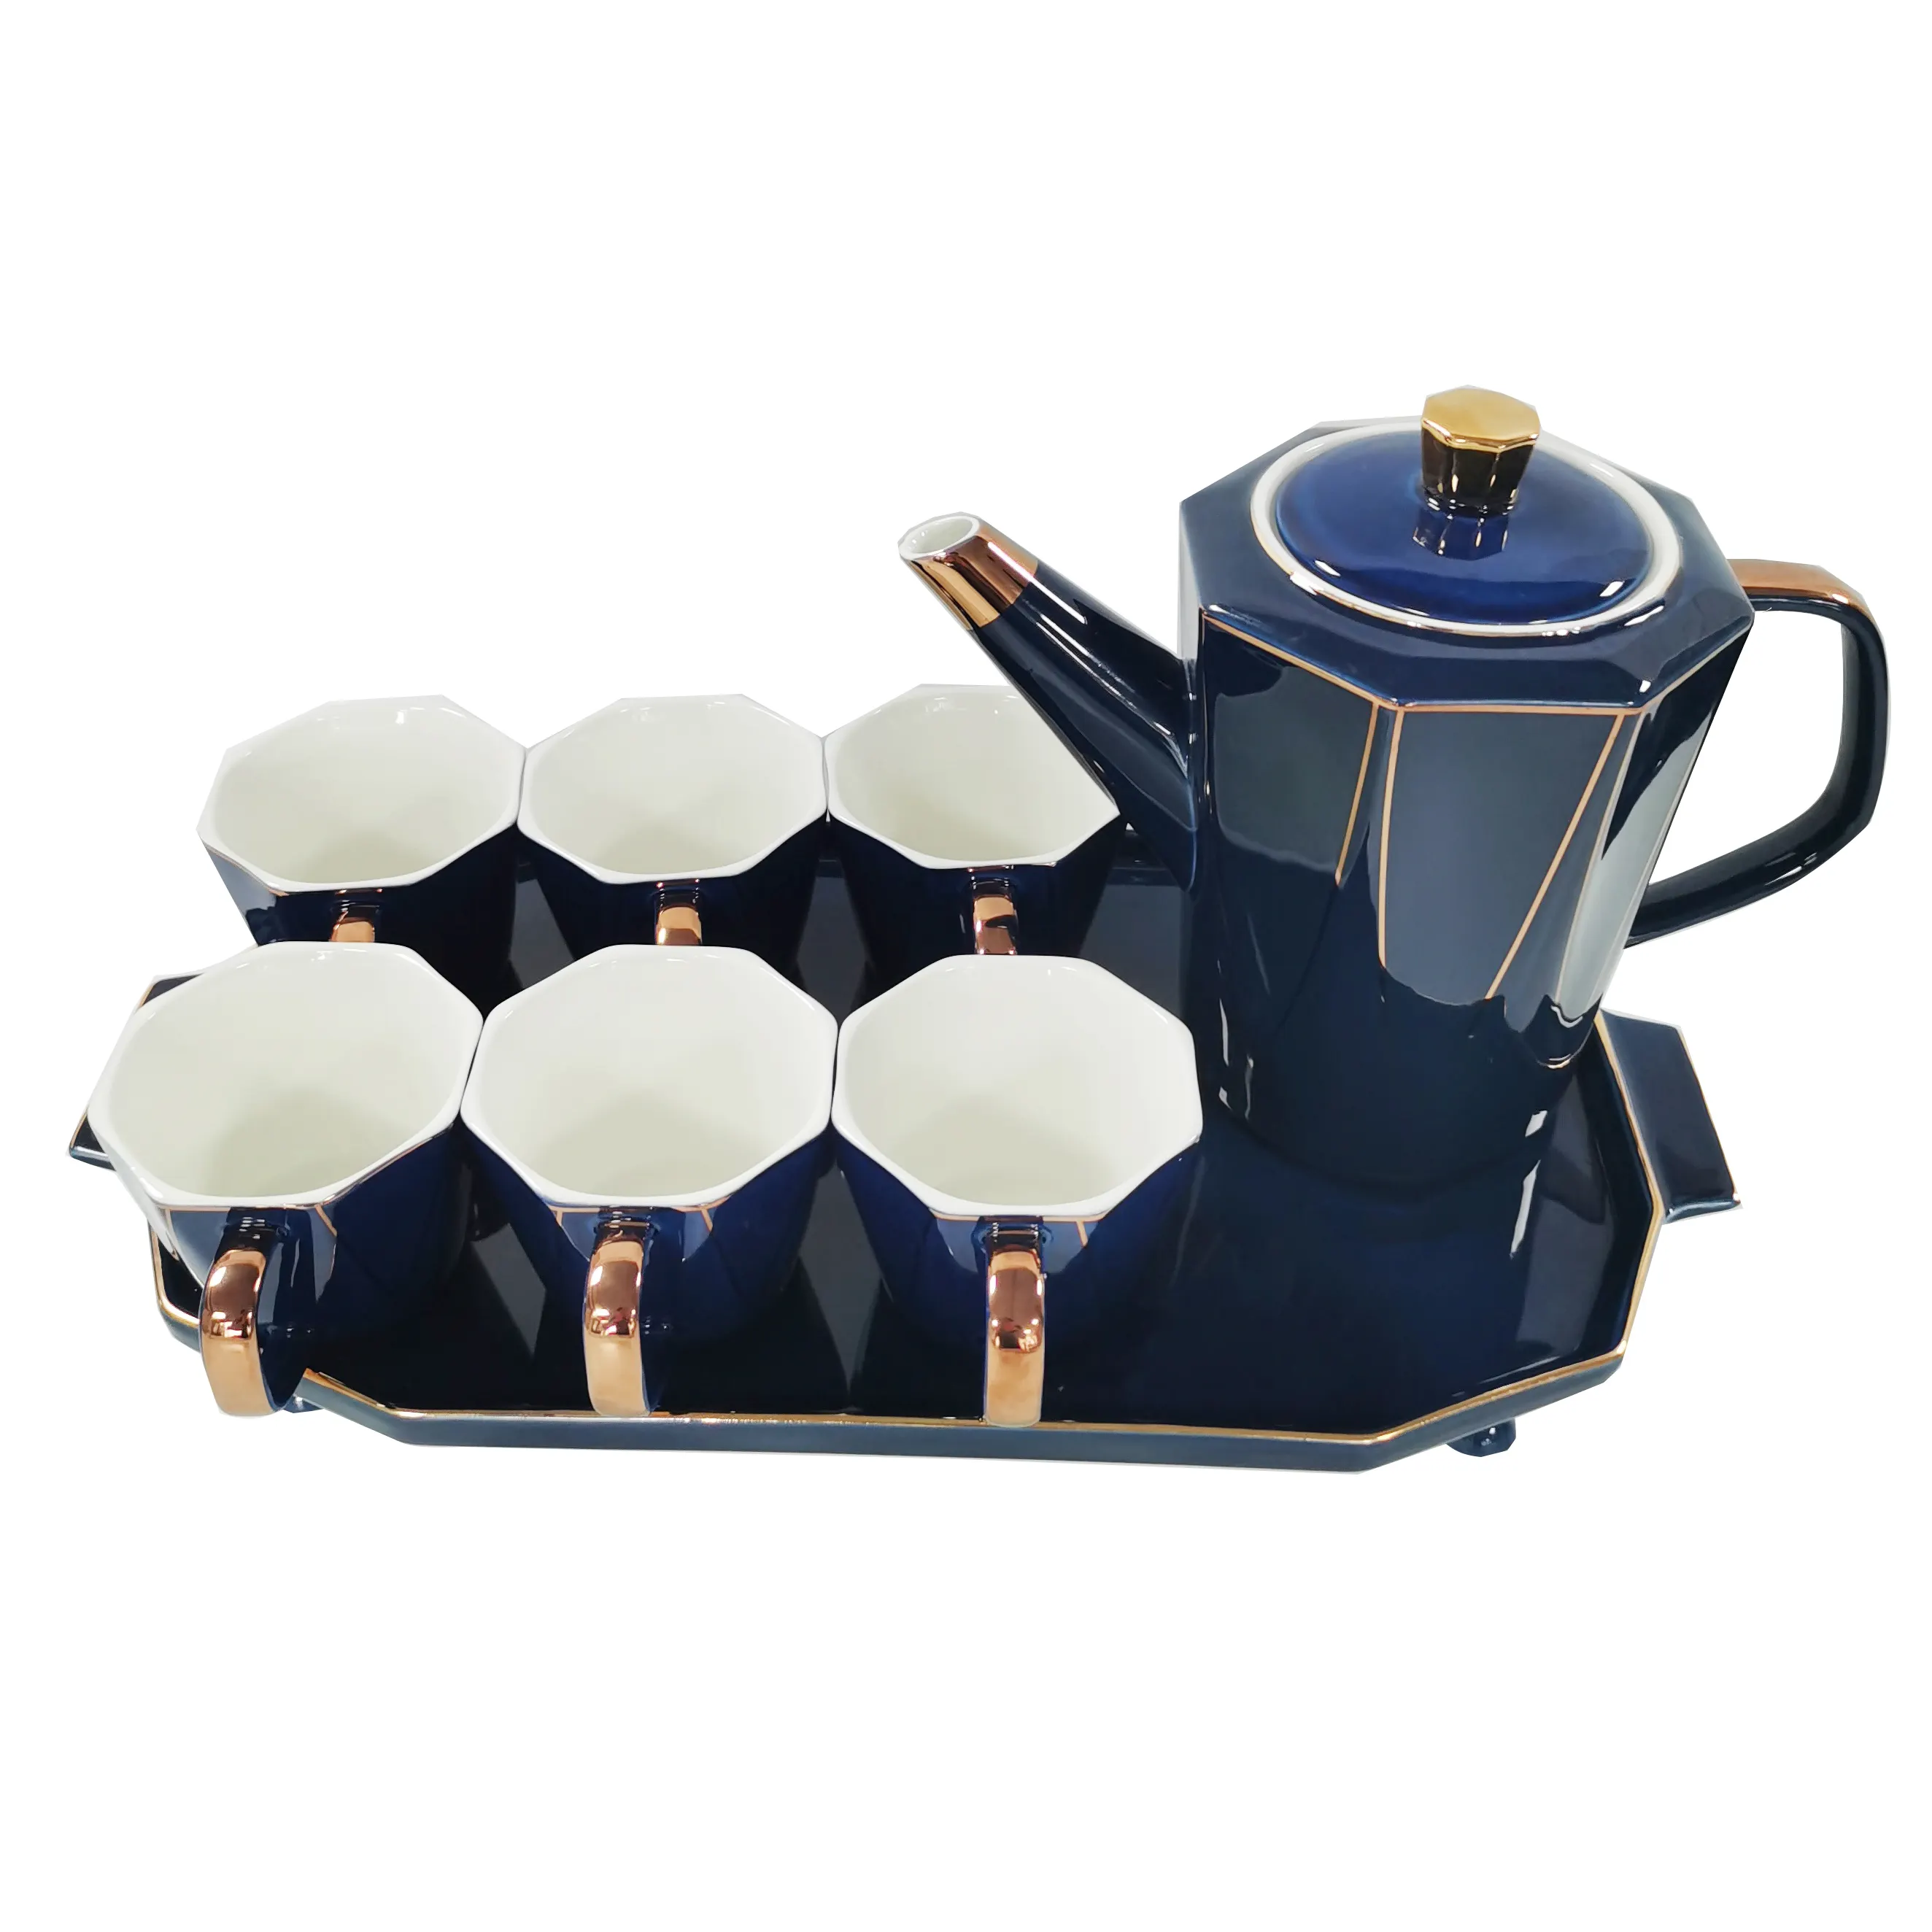 8Pcs with six Cups Luxury Porcelain Coffee Tea Set with Gold rim Ceramic Tea Pot and Cup Set for gift